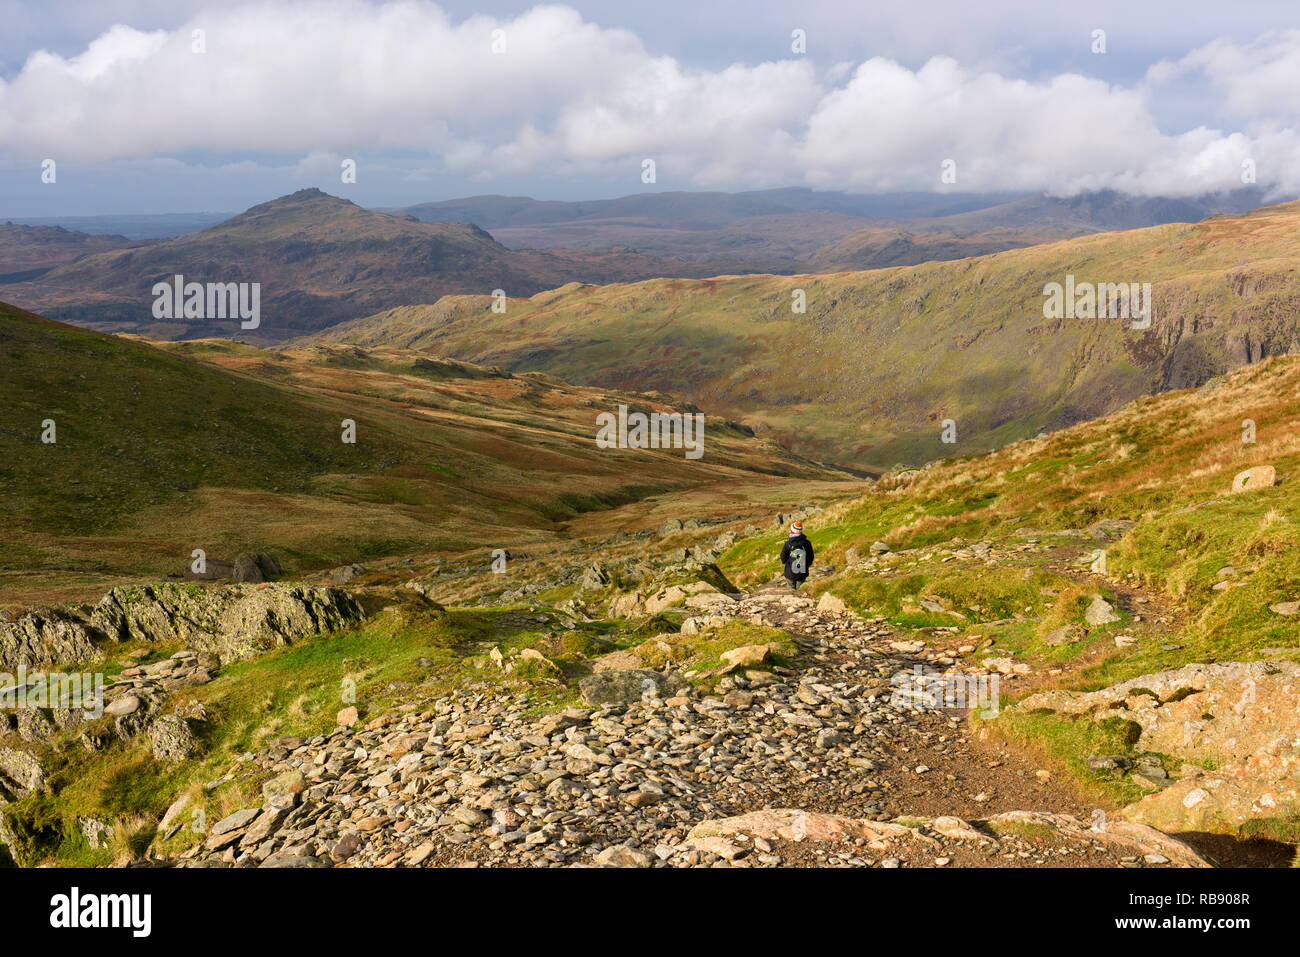 The rugged landscape of the Furness Fells from the northern flank of The Old Man of Coniston in the Lake District National Park, Cumbria, England. Stock Photo